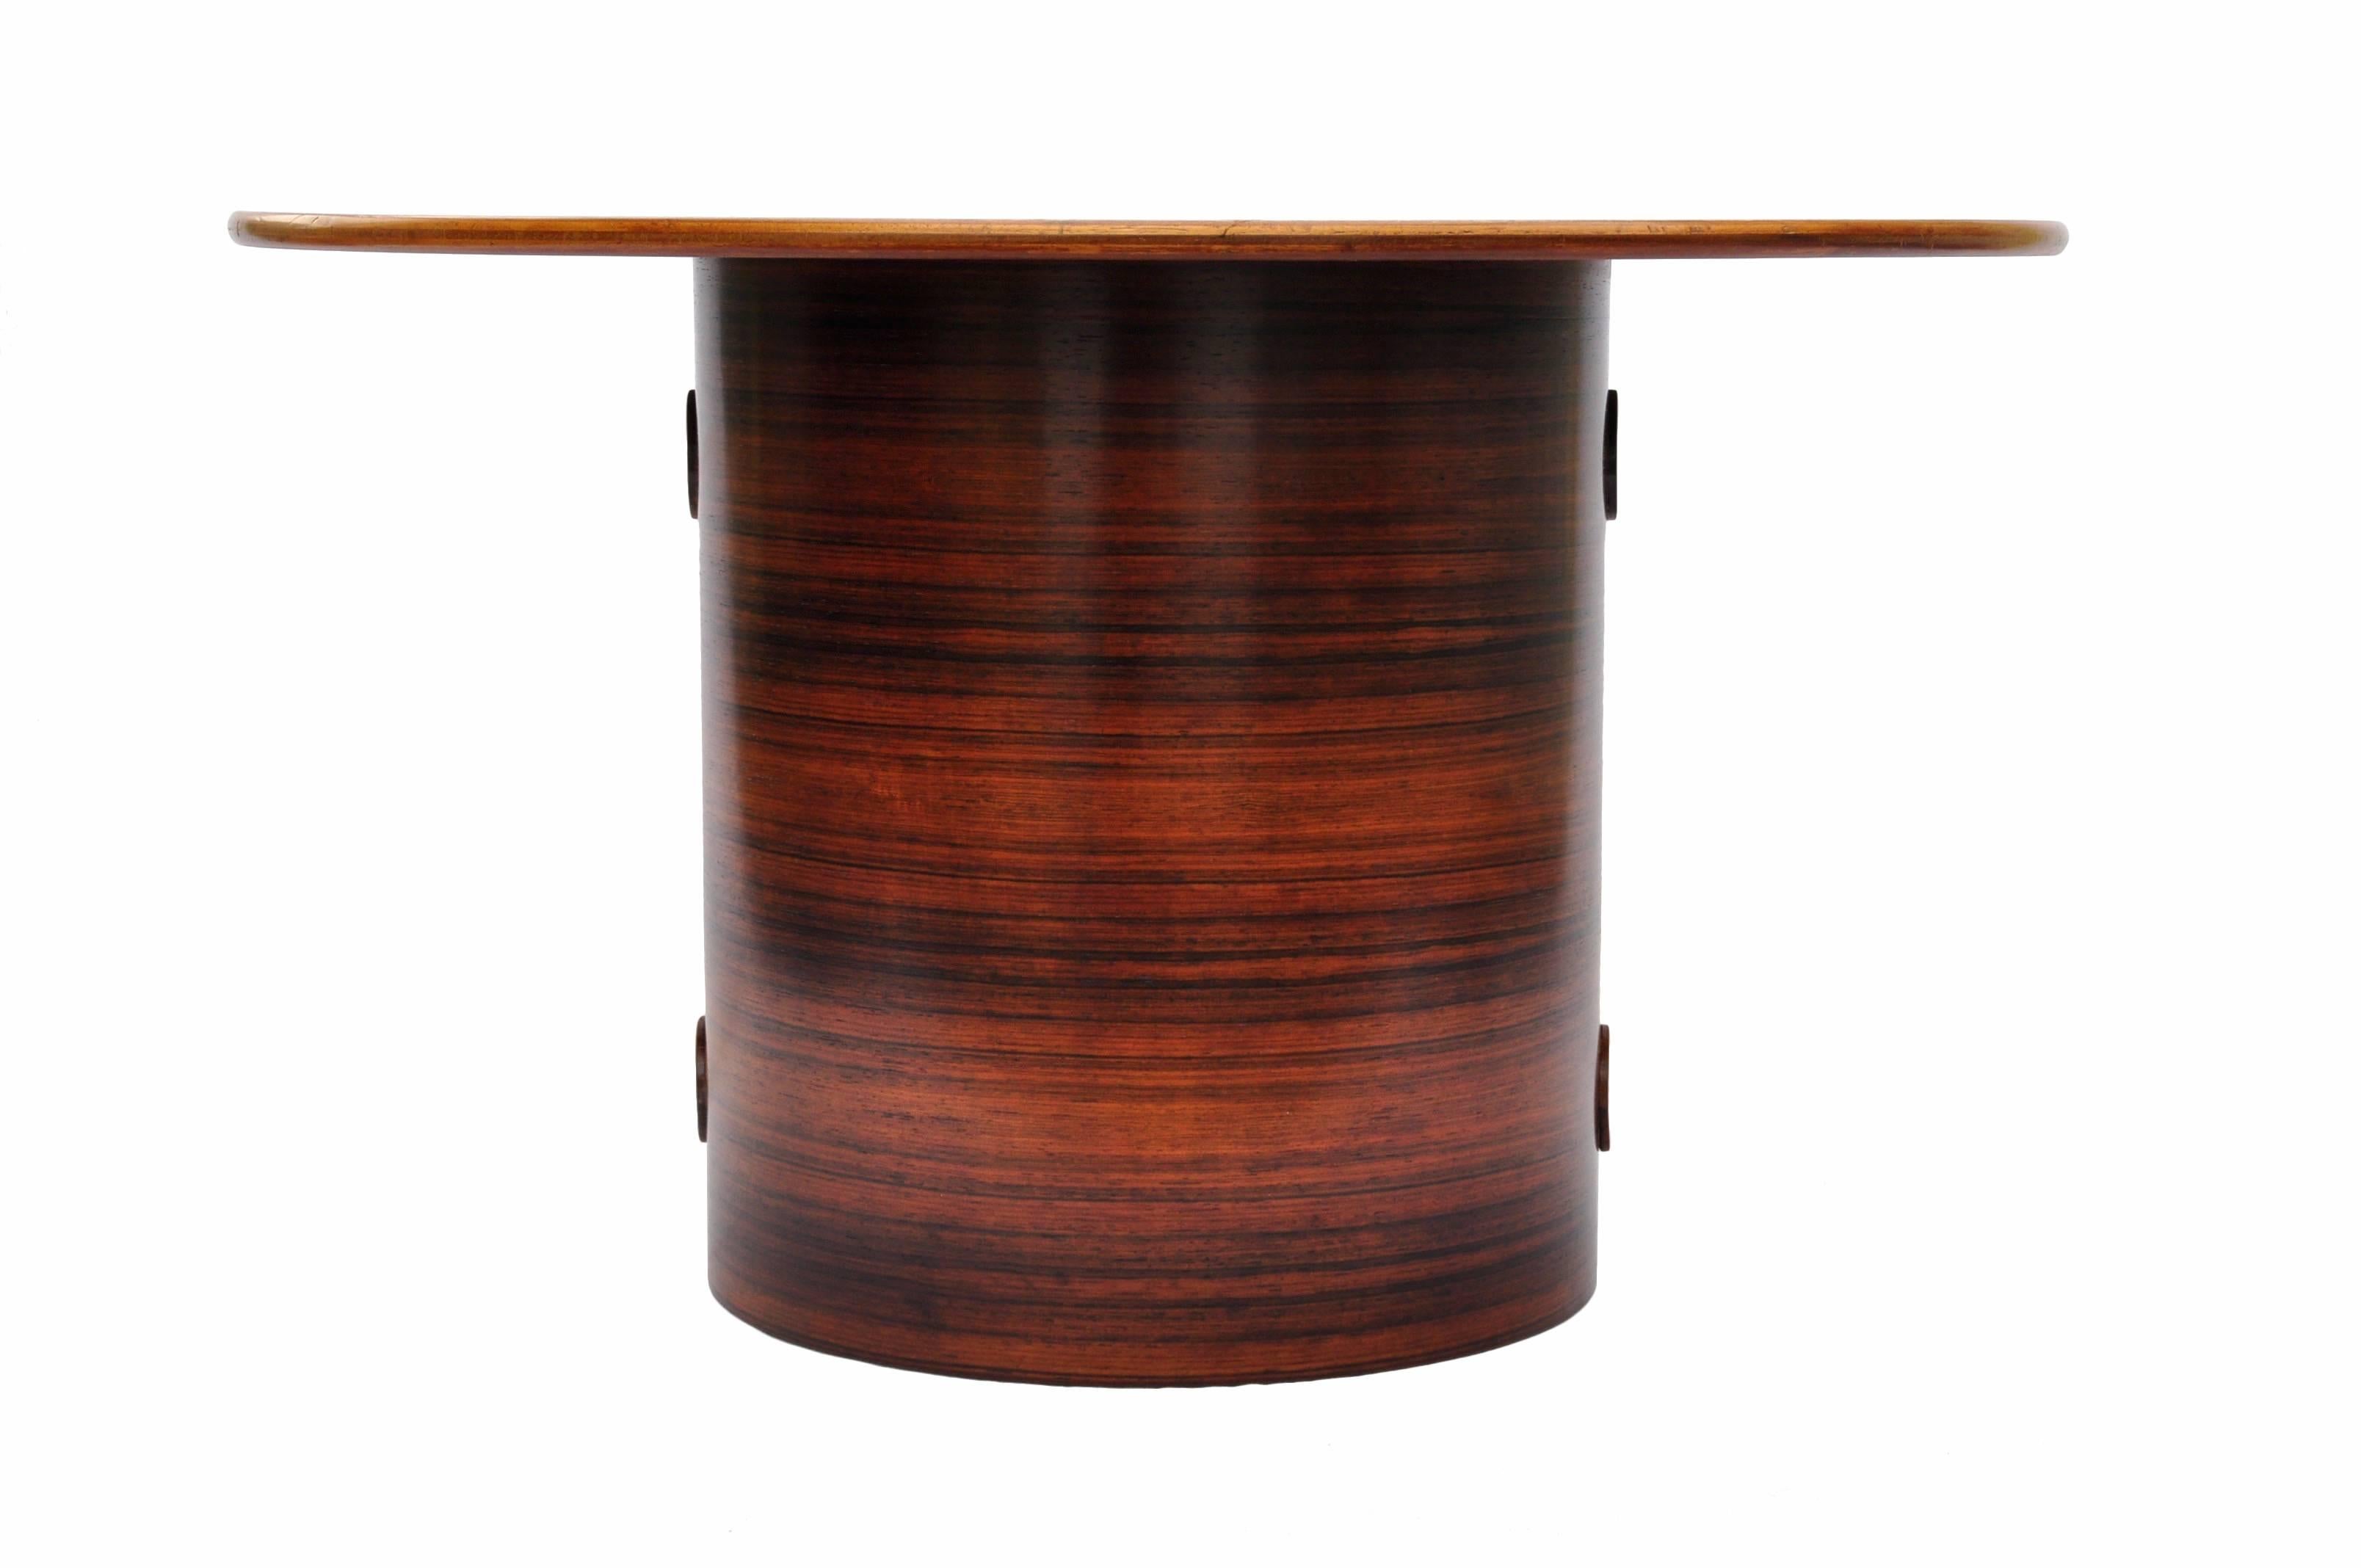 A rare and unusual coffee or center design for Knoll. The table was made in two different heights, the model shown here is the higher of the two variation. This rosewood veneer edition is an extremely rare version as the design was previously known